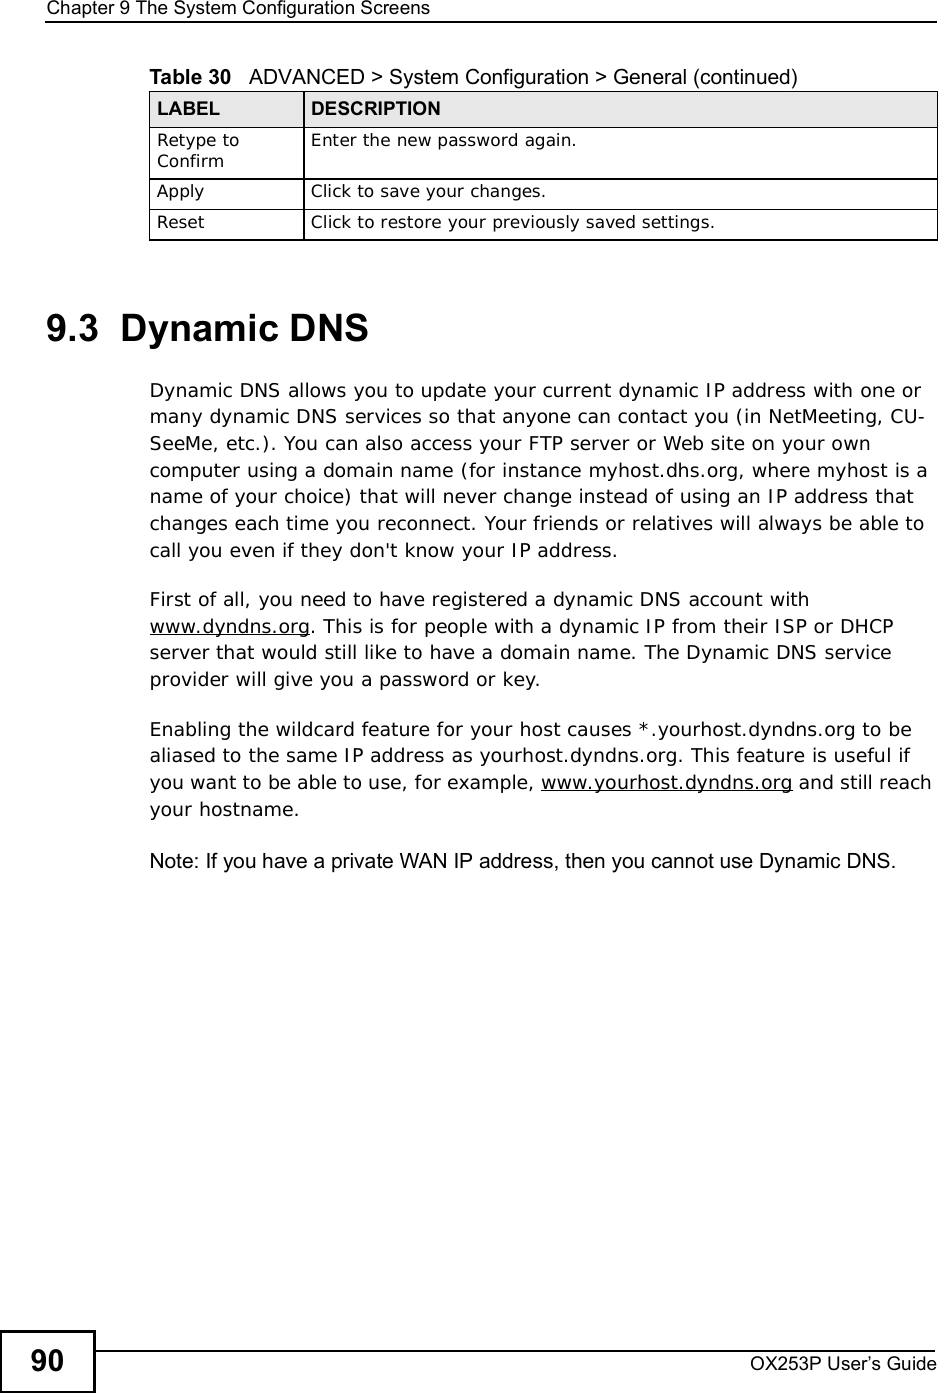 Chapter 9The System Configuration ScreensOX253P User’s Guide909.3  Dynamic DNSDynamic DNS allows you to update your current dynamic IP address with one or many dynamic DNS services so that anyone can contact you (in NetMeeting, CU-SeeMe, etc.). You can also access your FTP server or Web site on your own computer using a domain name (for instance myhost.dhs.org, where myhost is a name of your choice) that will never change instead of using an IP address that changes each time you reconnect. Your friends or relatives will always be able to call you even if they don&apos;t know your IP address.First of all, you need to have registered a dynamic DNS account with www.dyndns.org. This is for people with a dynamic IP from their ISP or DHCP server that would still like to have a domain name. The Dynamic DNS service provider will give you a password or key.Enabling the wildcard feature for your host causes *.yourhost.dyndns.org to be aliased to the same IP address as yourhost.dyndns.org. This feature is useful if you want to be able to use, for example, www.yourhost.dyndns.org and still reach your hostname.Note: If you have a private WAN IP address, then you cannot use Dynamic DNS.Retype to Confirm Enter the new password again.ApplyClick to save your changes.ResetClick to restore your previously saved settings.Table 30   ADVANCED &gt; System Configuration &gt; General (continued)LABEL DESCRIPTION